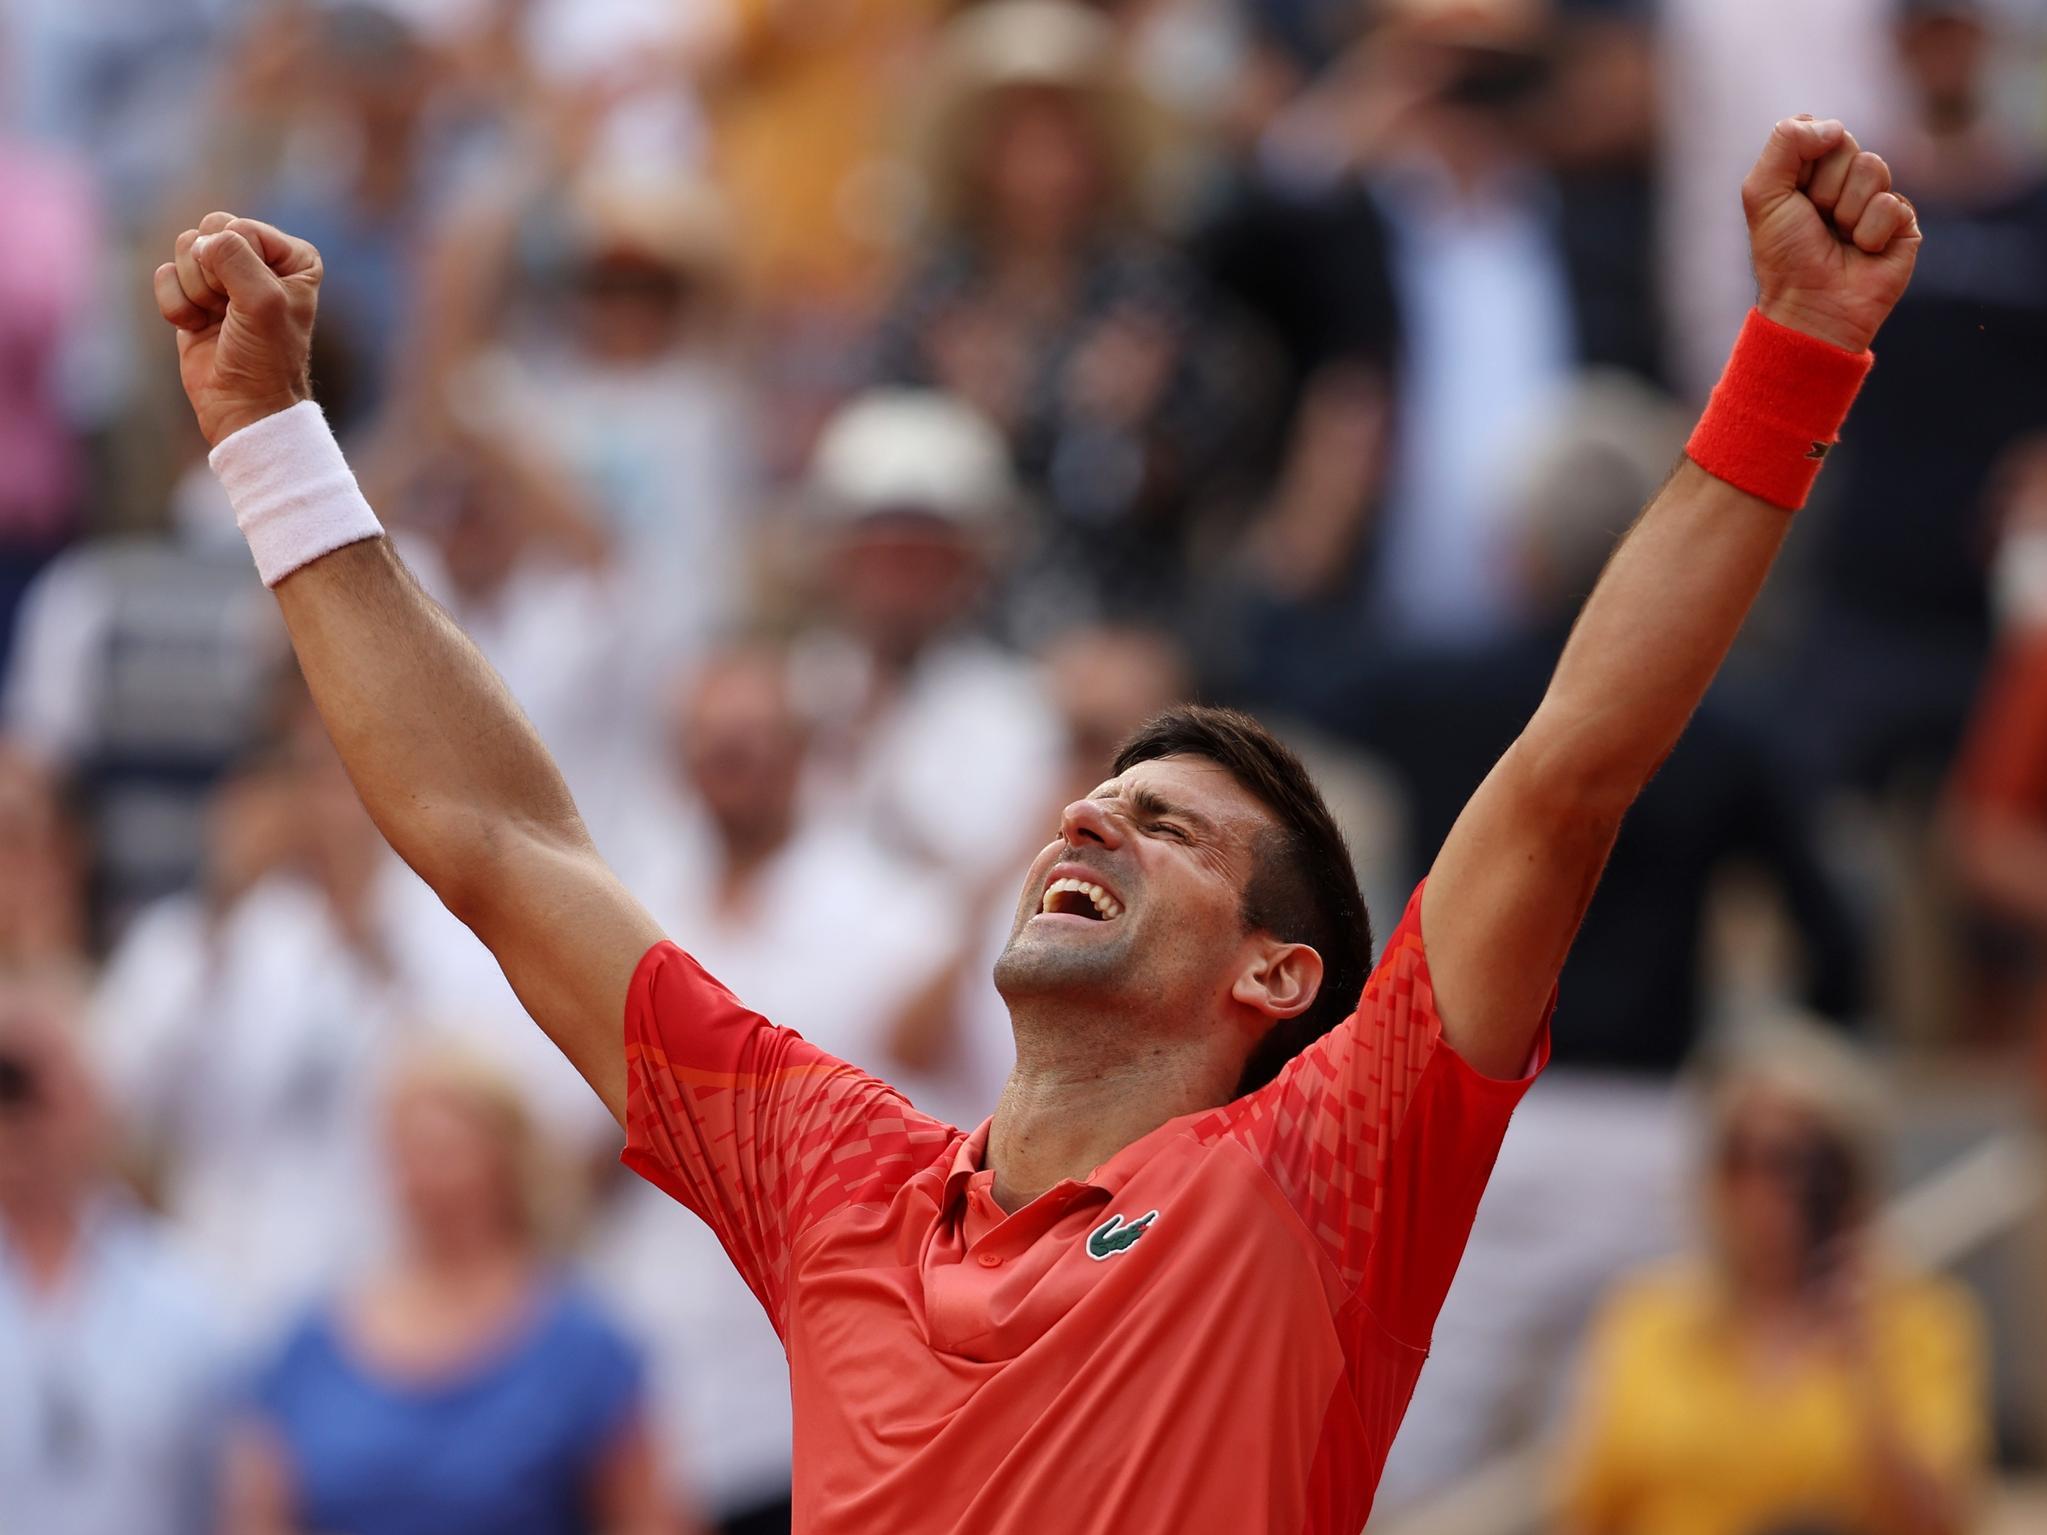 French Open Novak Djokovic Now Officially The Most Successful